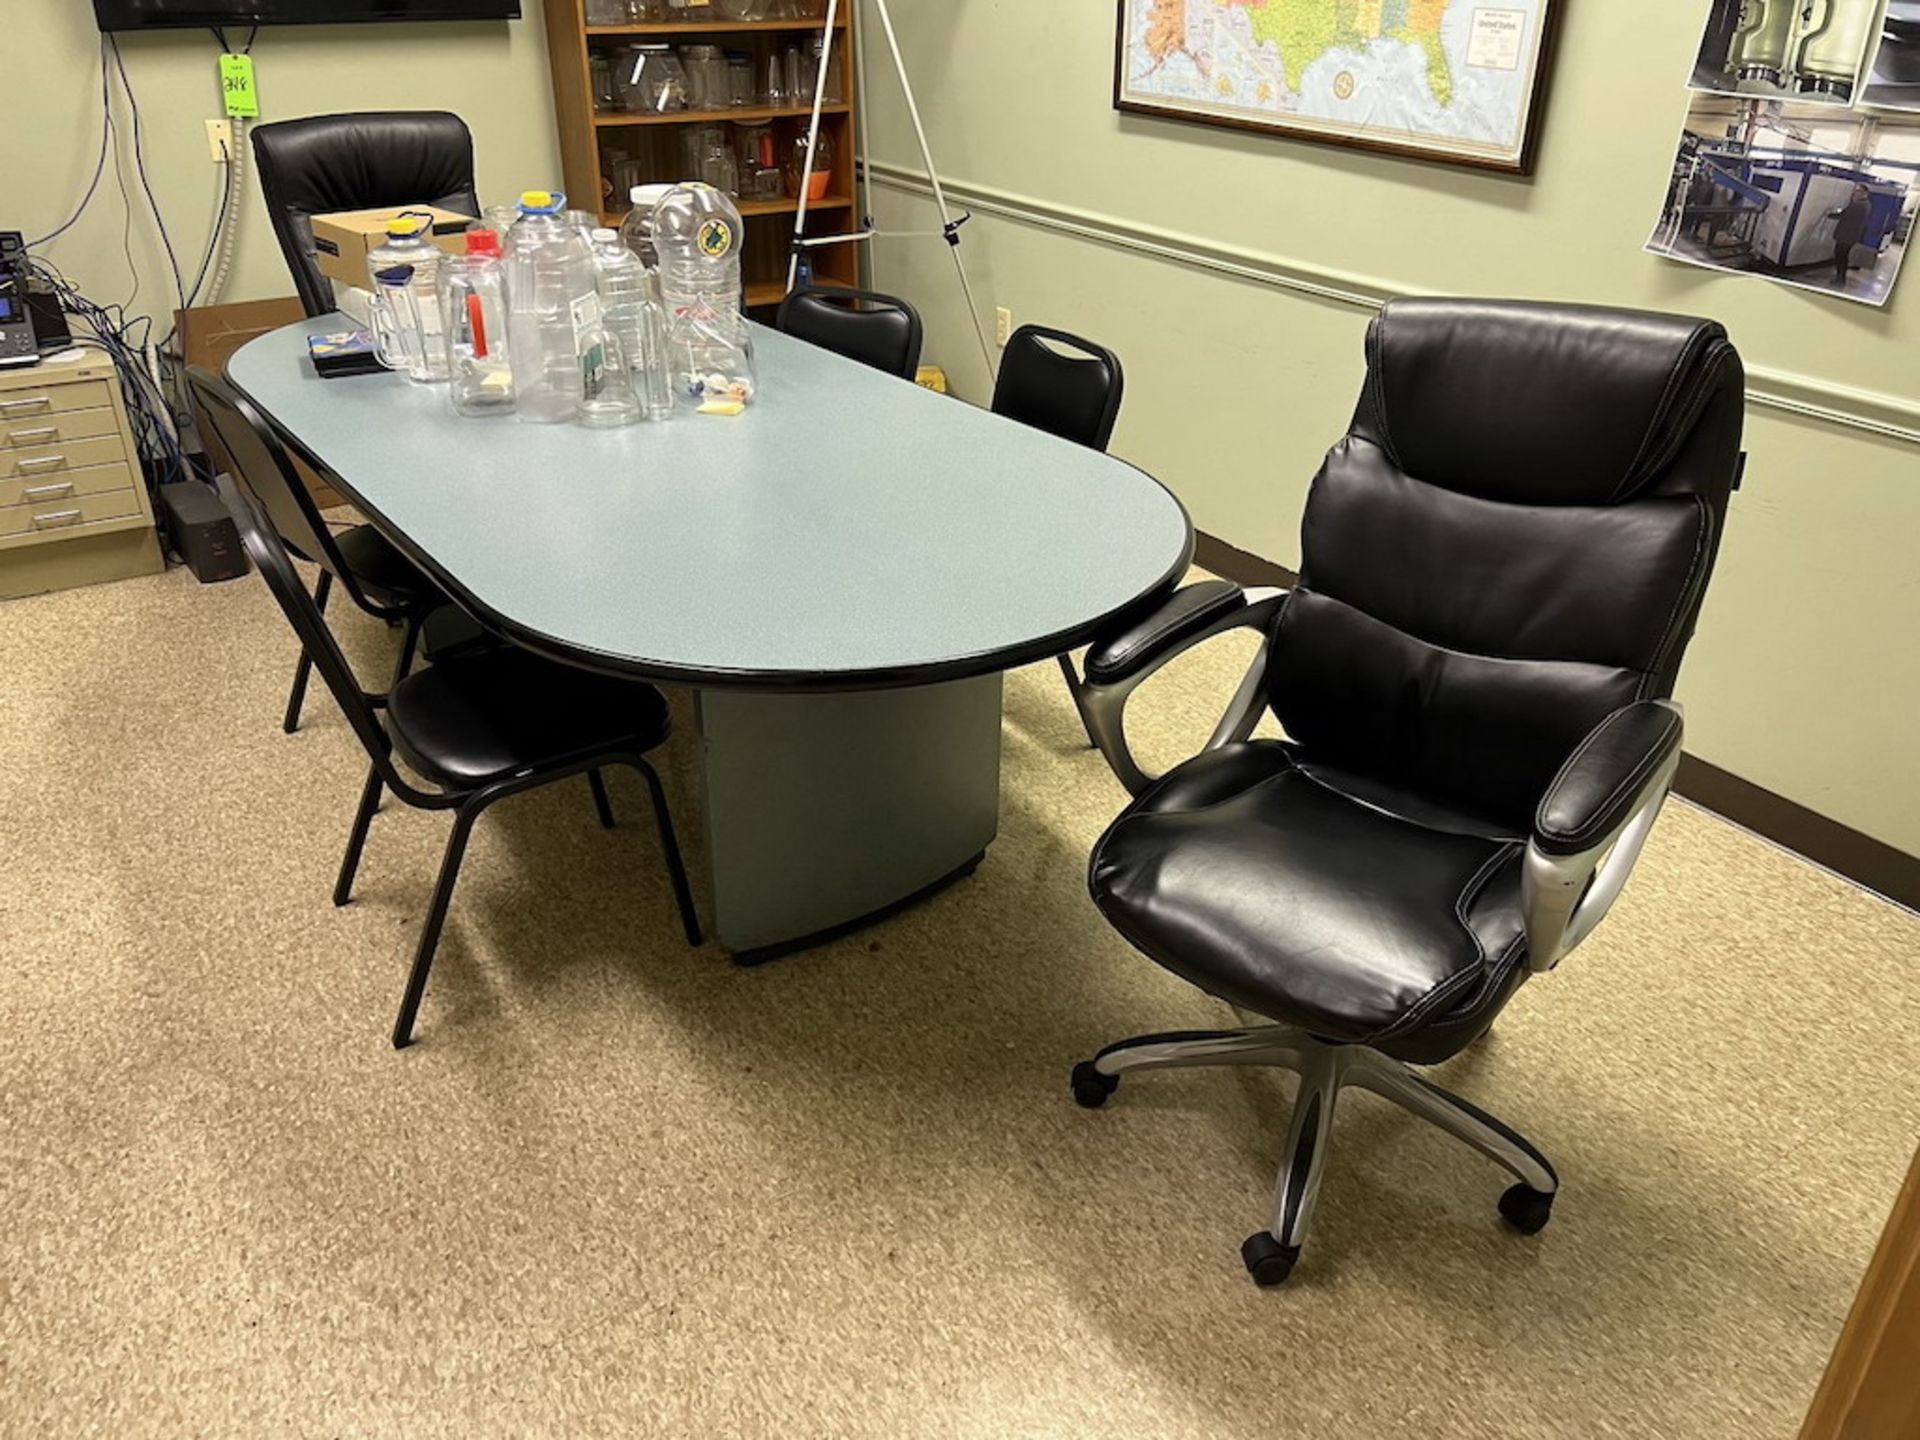 Contents of Office To Include (1) 7' L x 44'' W Conference Table (3) Rolling Office Chairs, Etc. - Image 2 of 8